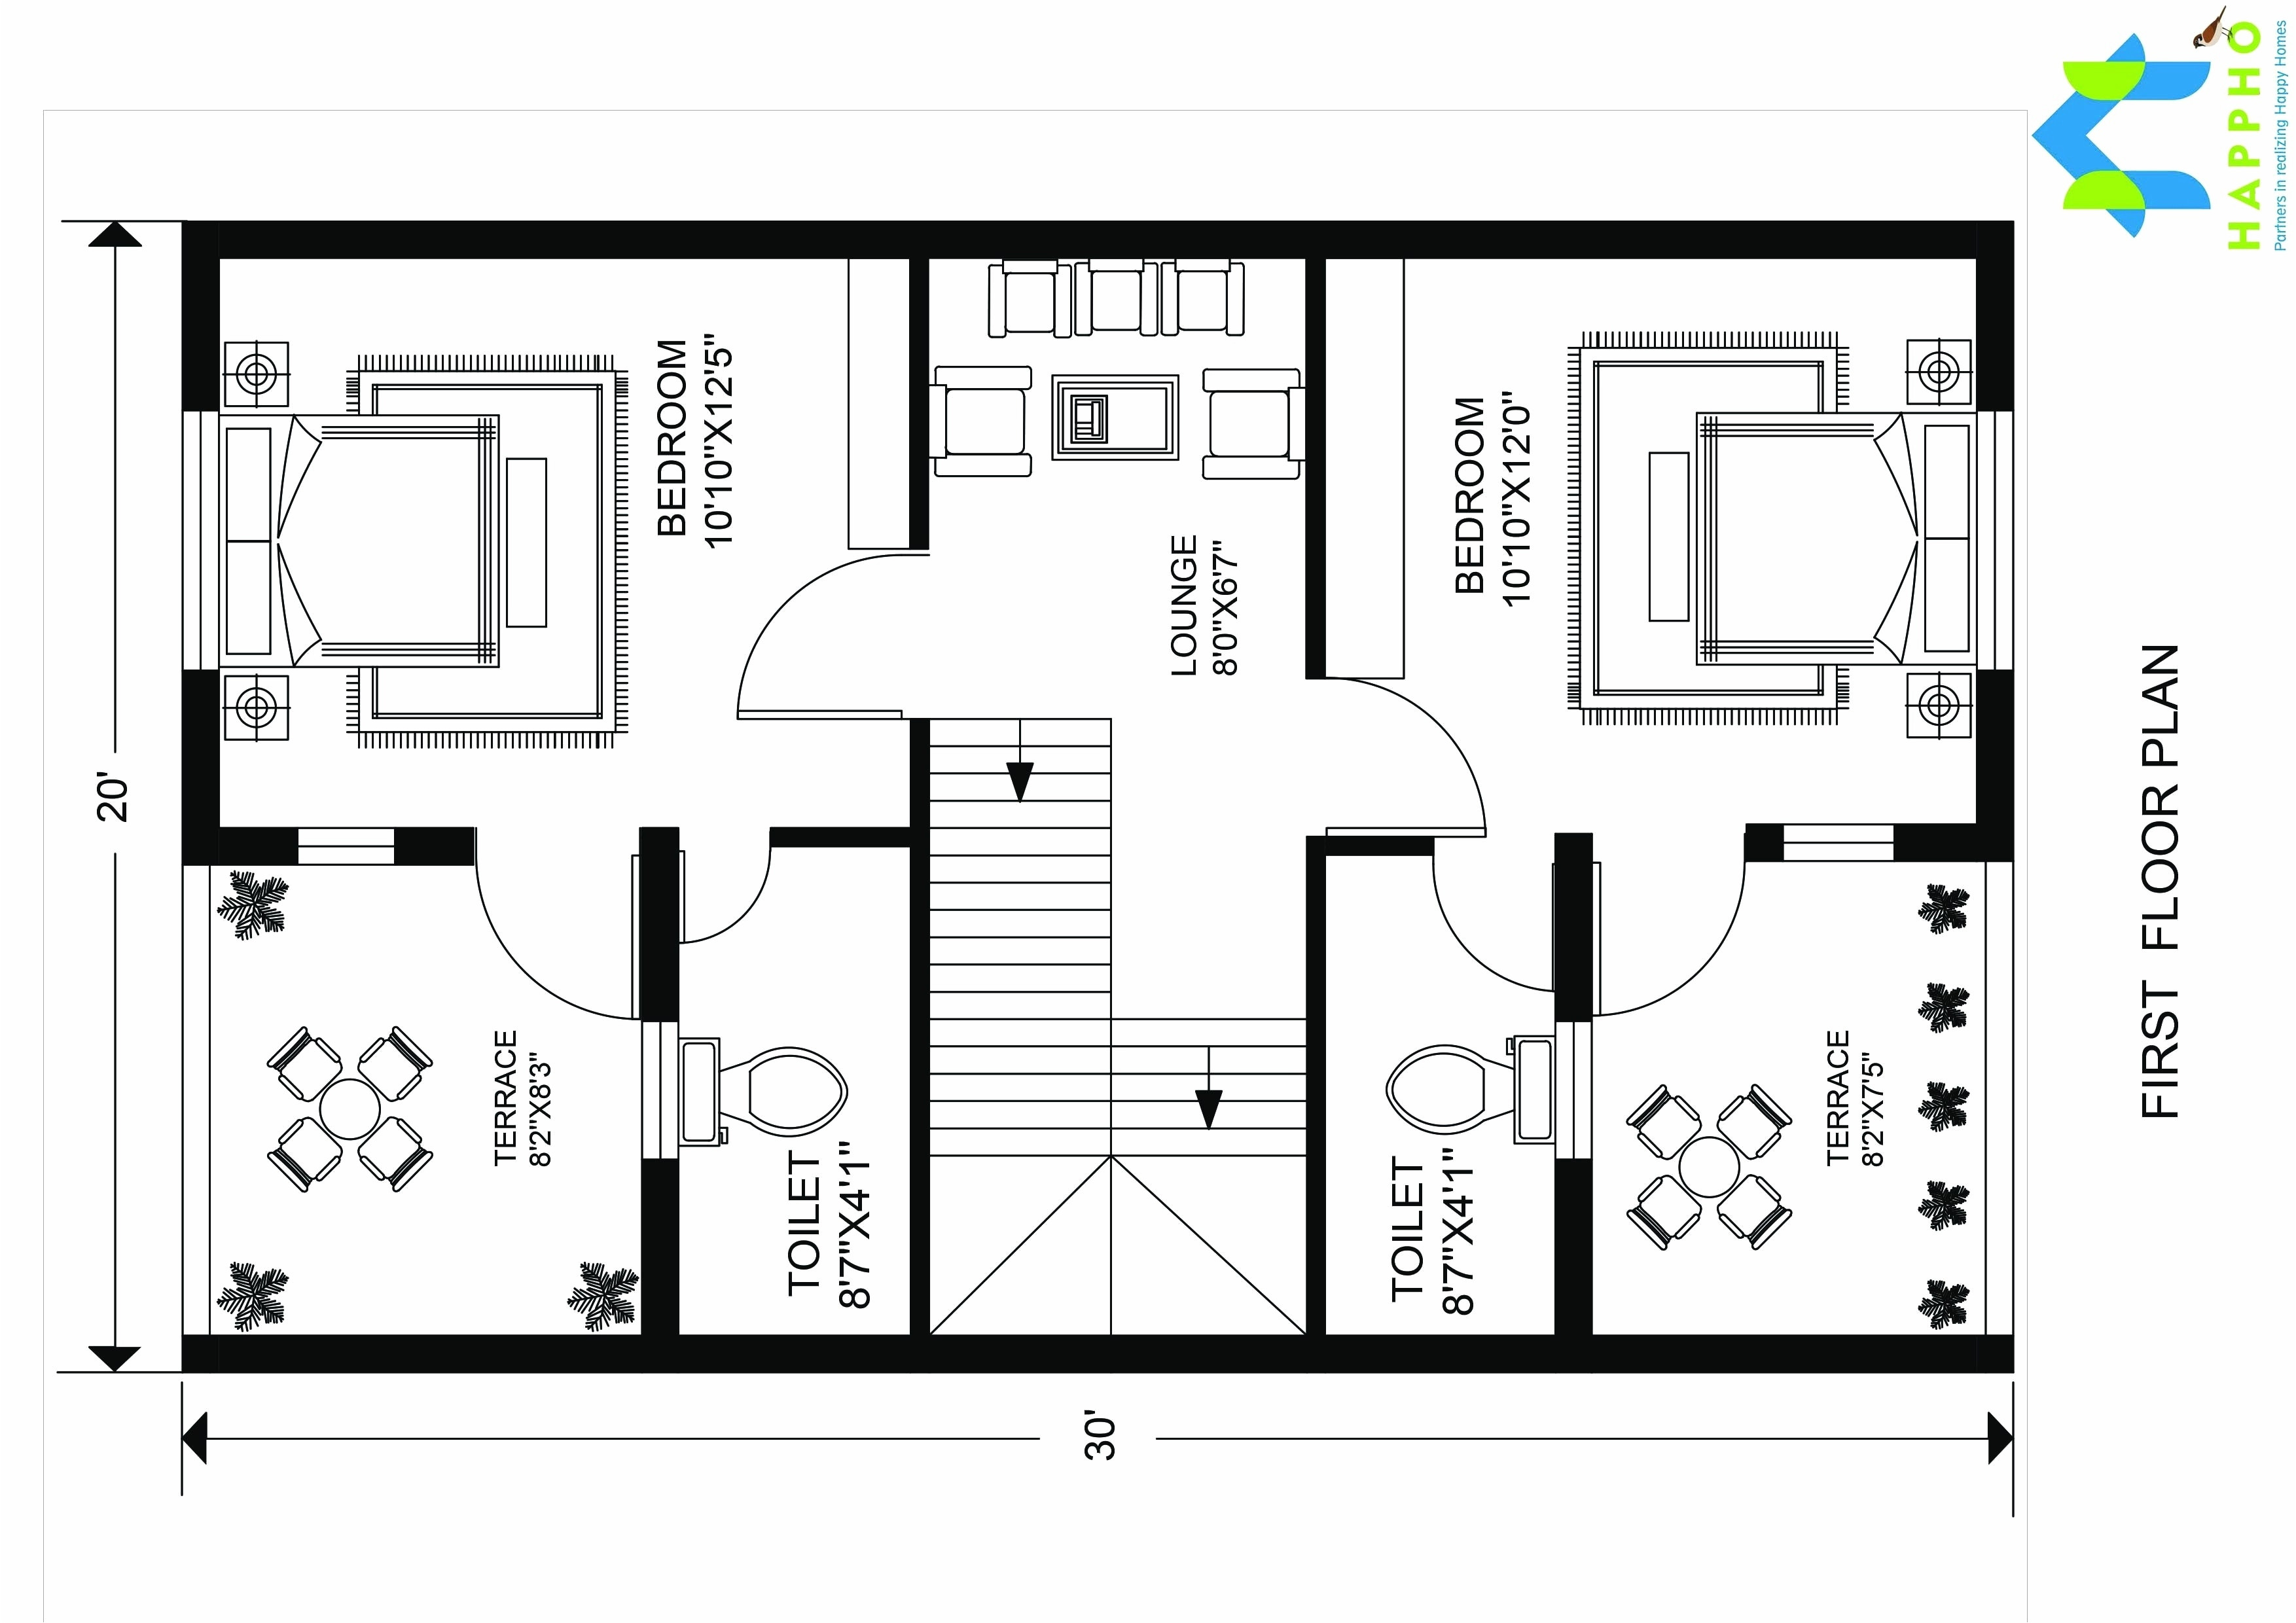 30 ft wide house plans modern 600 square foot house plans new 3 bhk floor plan for 30 x 20 feet